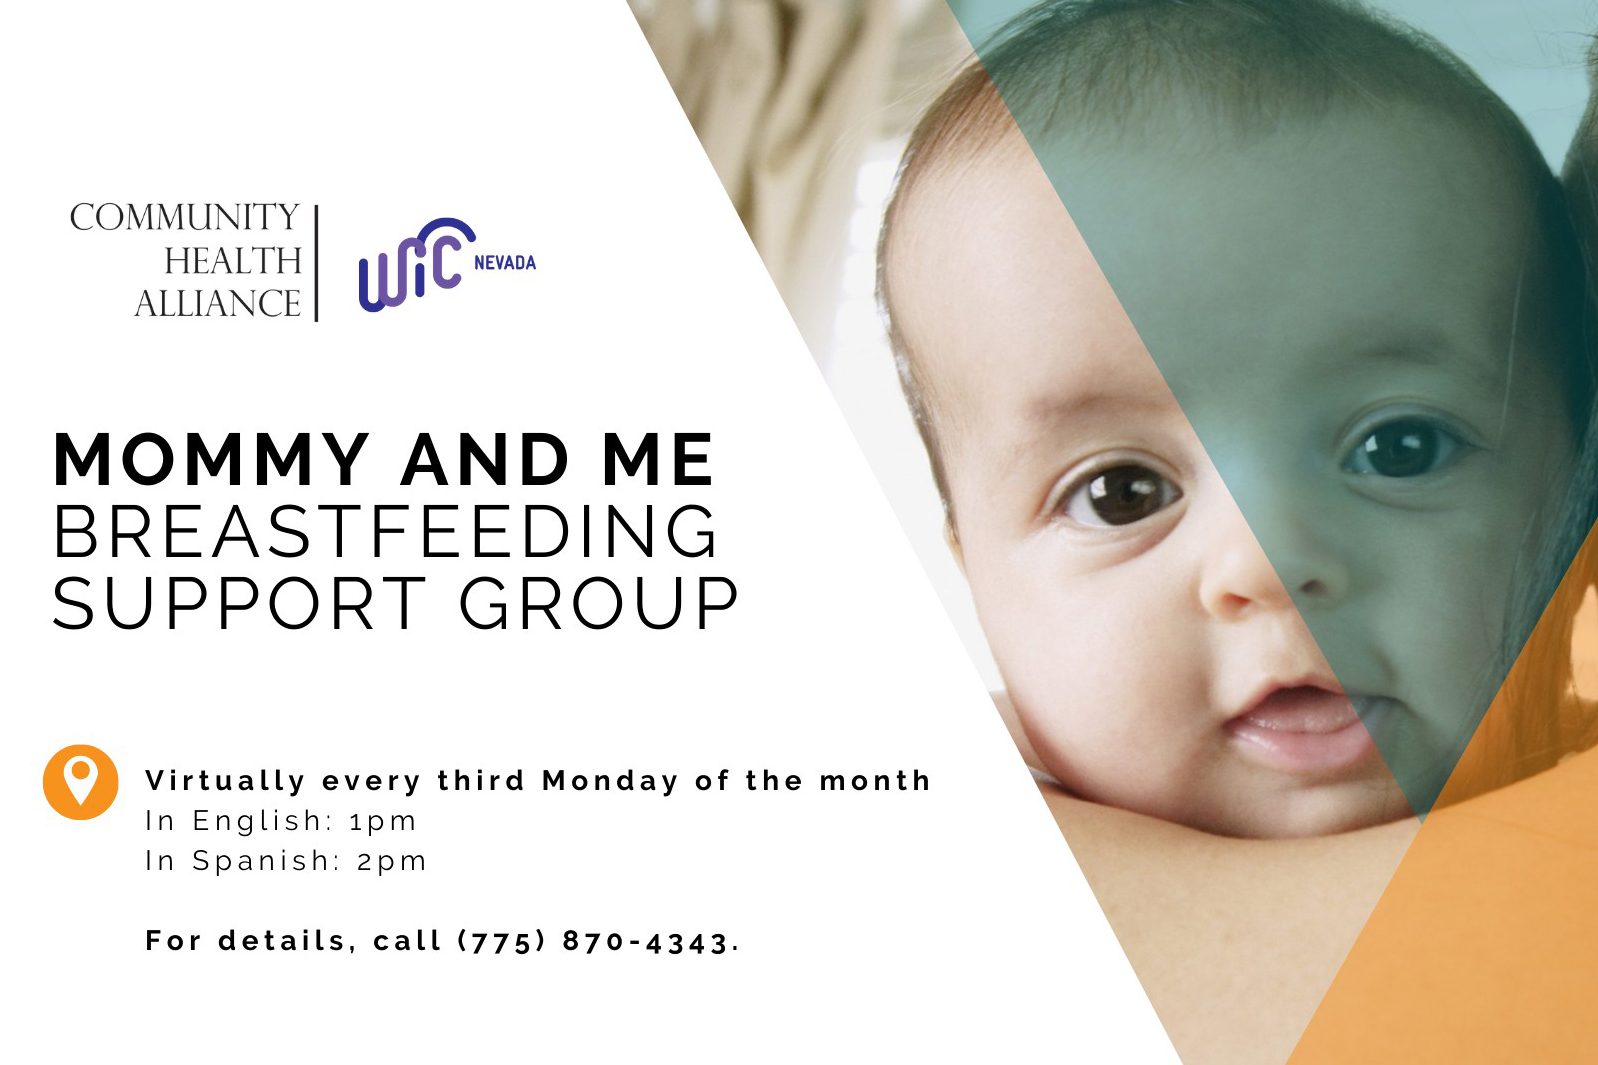 WIC Mommy and Me Breastfeeding Support Group